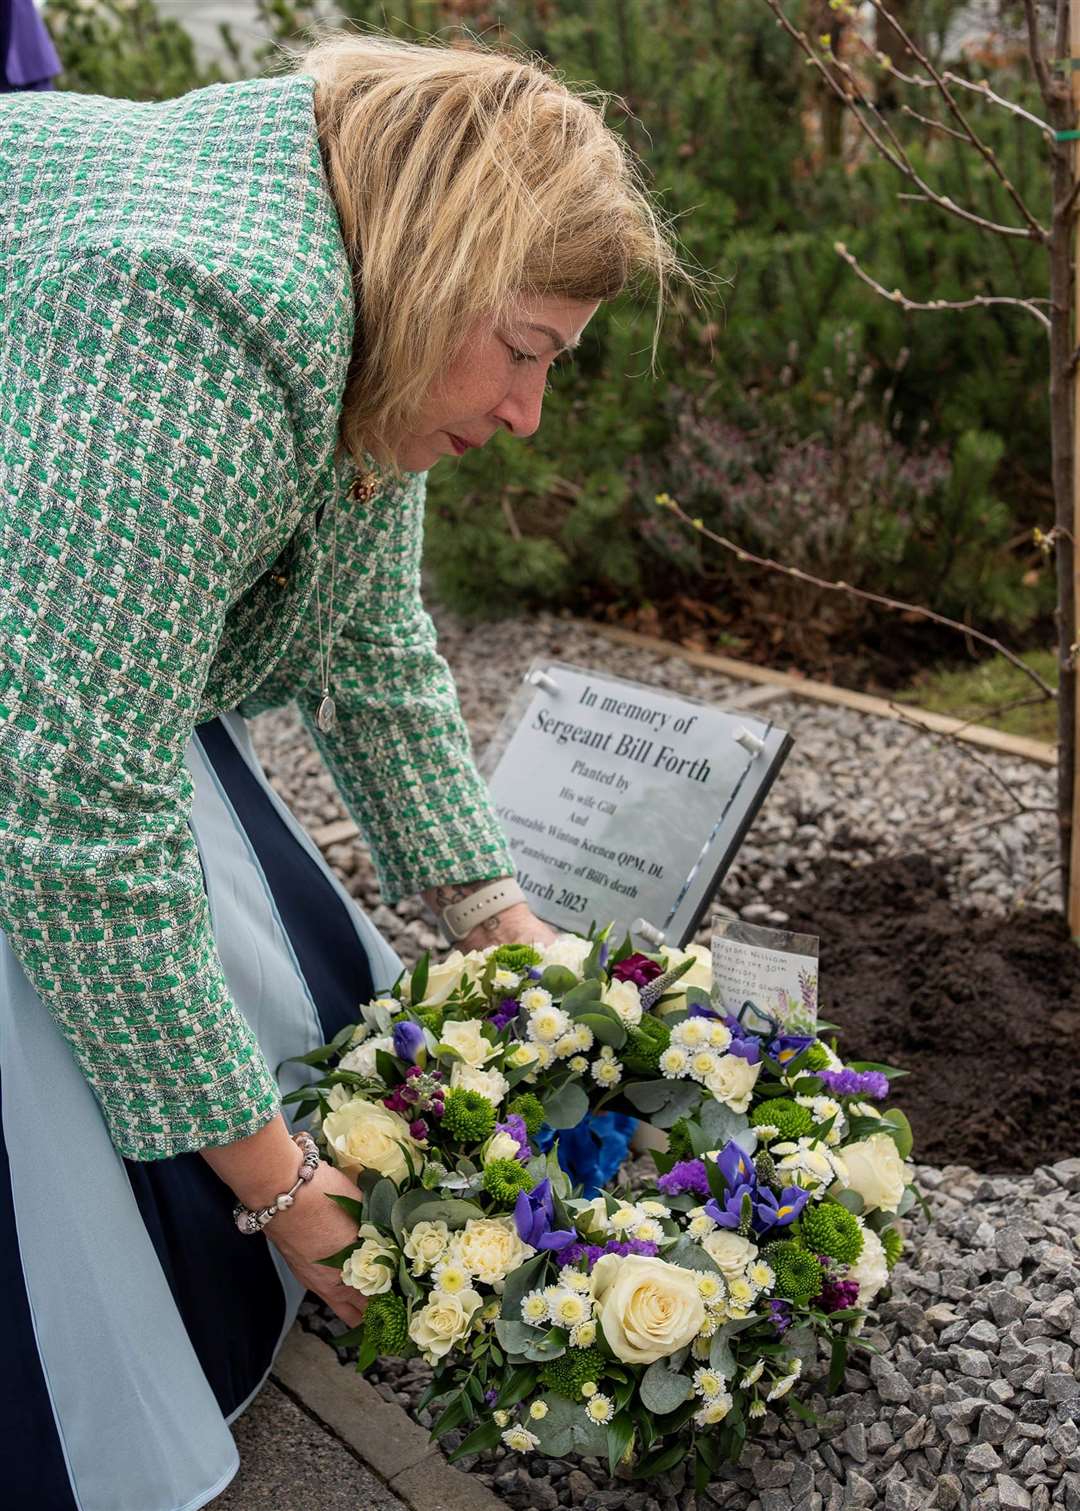 Mr Forth’s widow, Gill Merrin, at a memorial for her late husband last year (Northumbria Police/PA)